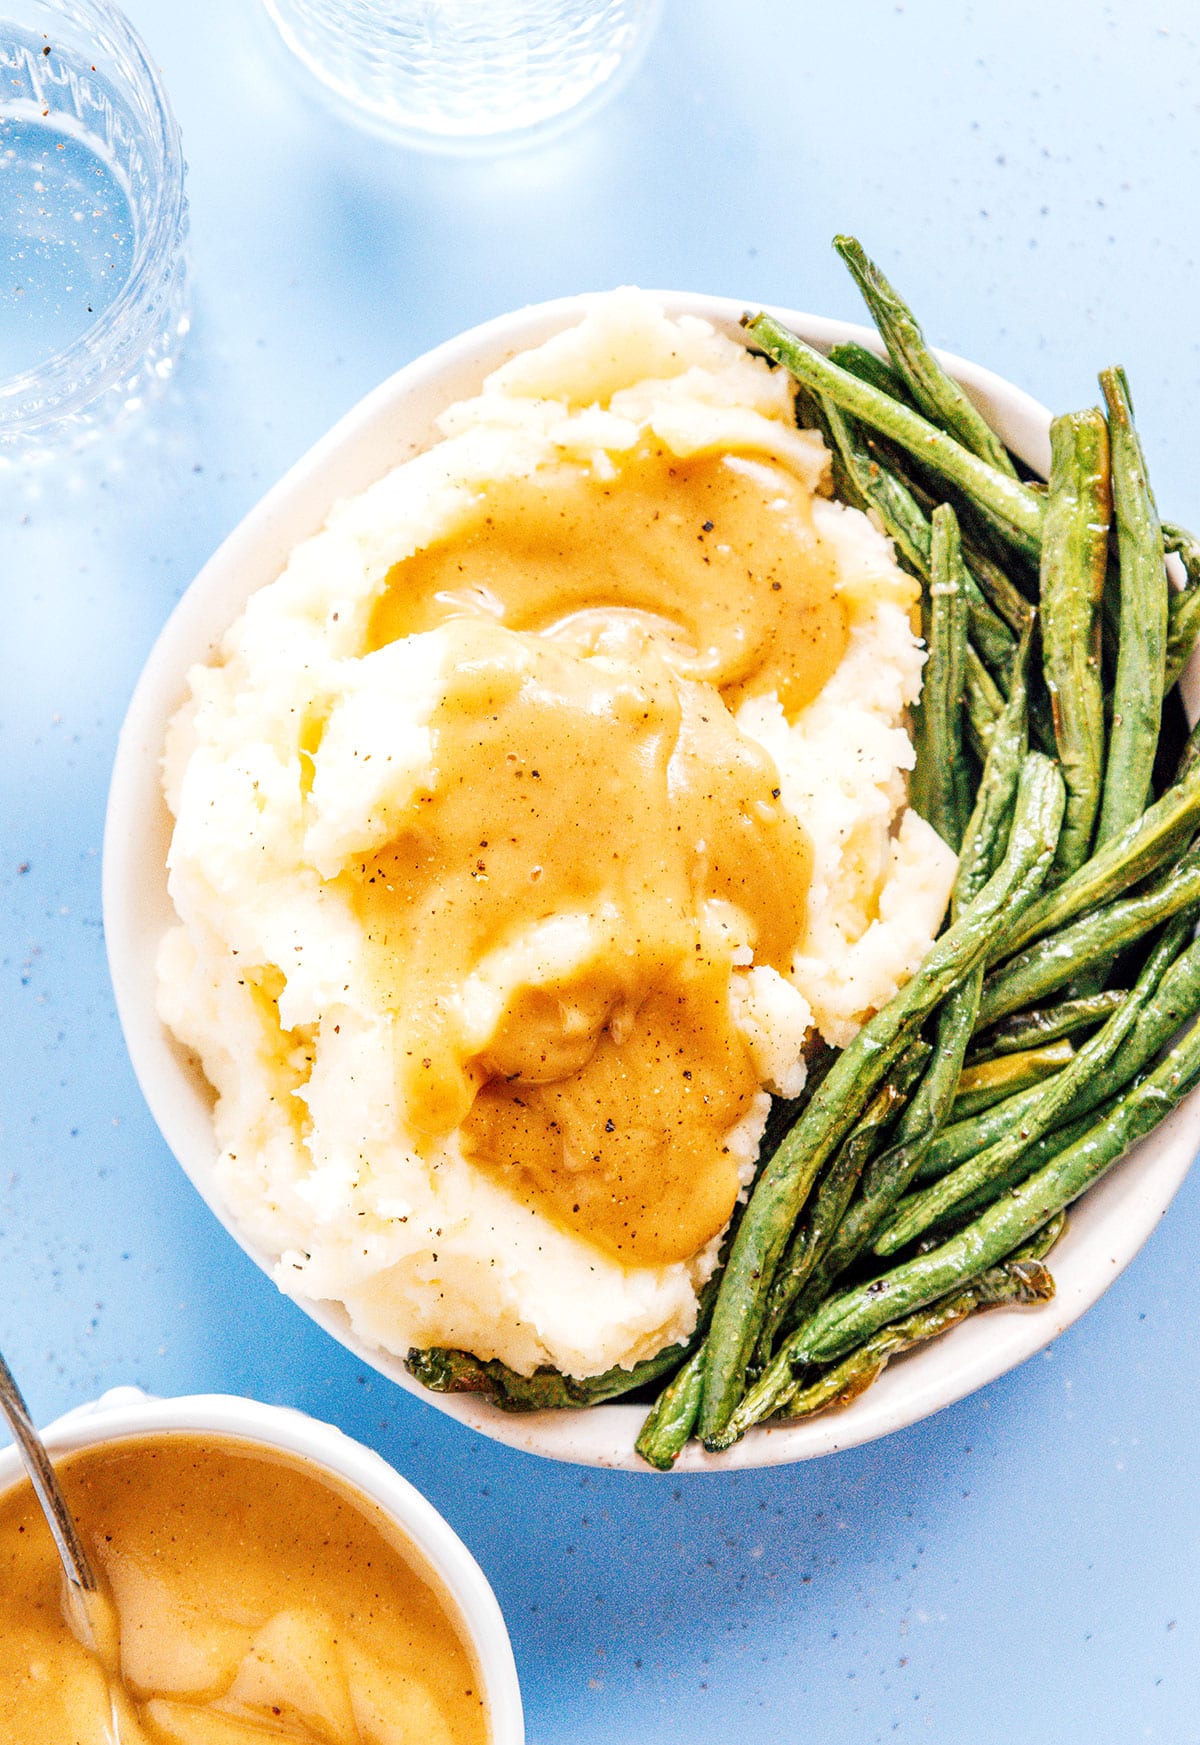 Gravy on top of mashed potatoes and green beans.